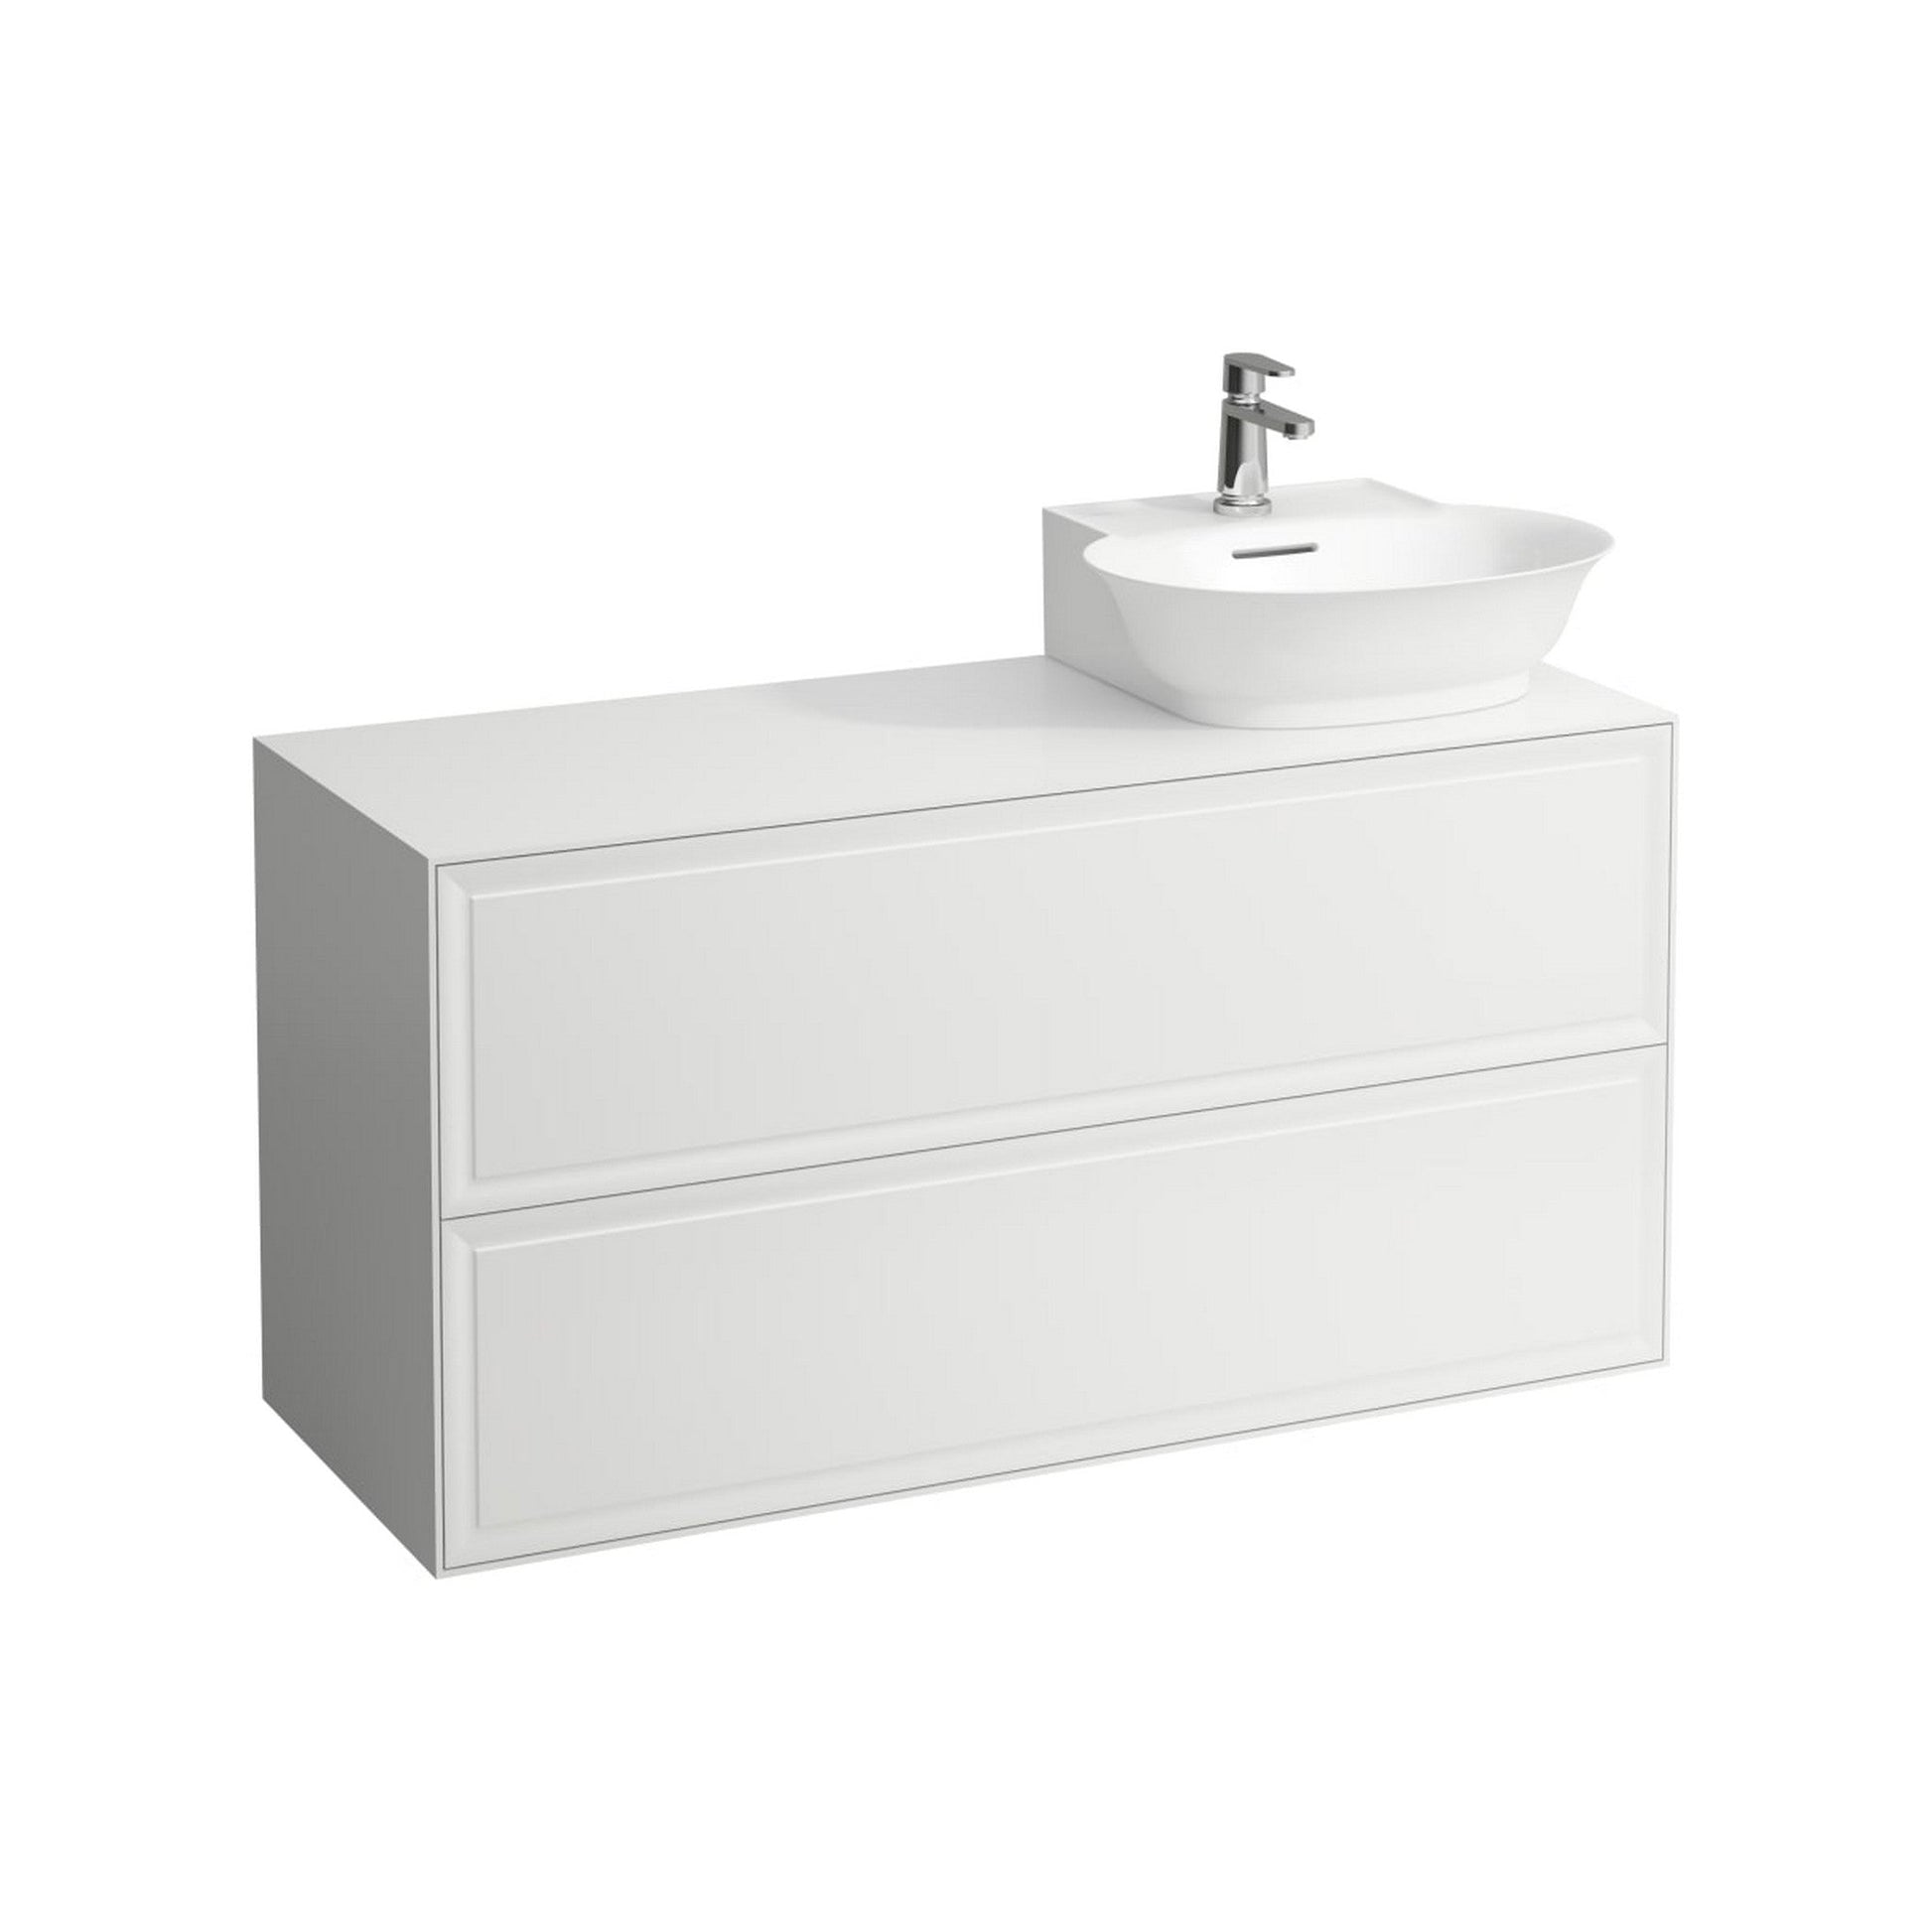 Laufen New Classic 46" 2-Drawer White Wall-Mounted Vanity With Sink Cut-out on the Right for New Classic Bathroom Sink Model: H816852